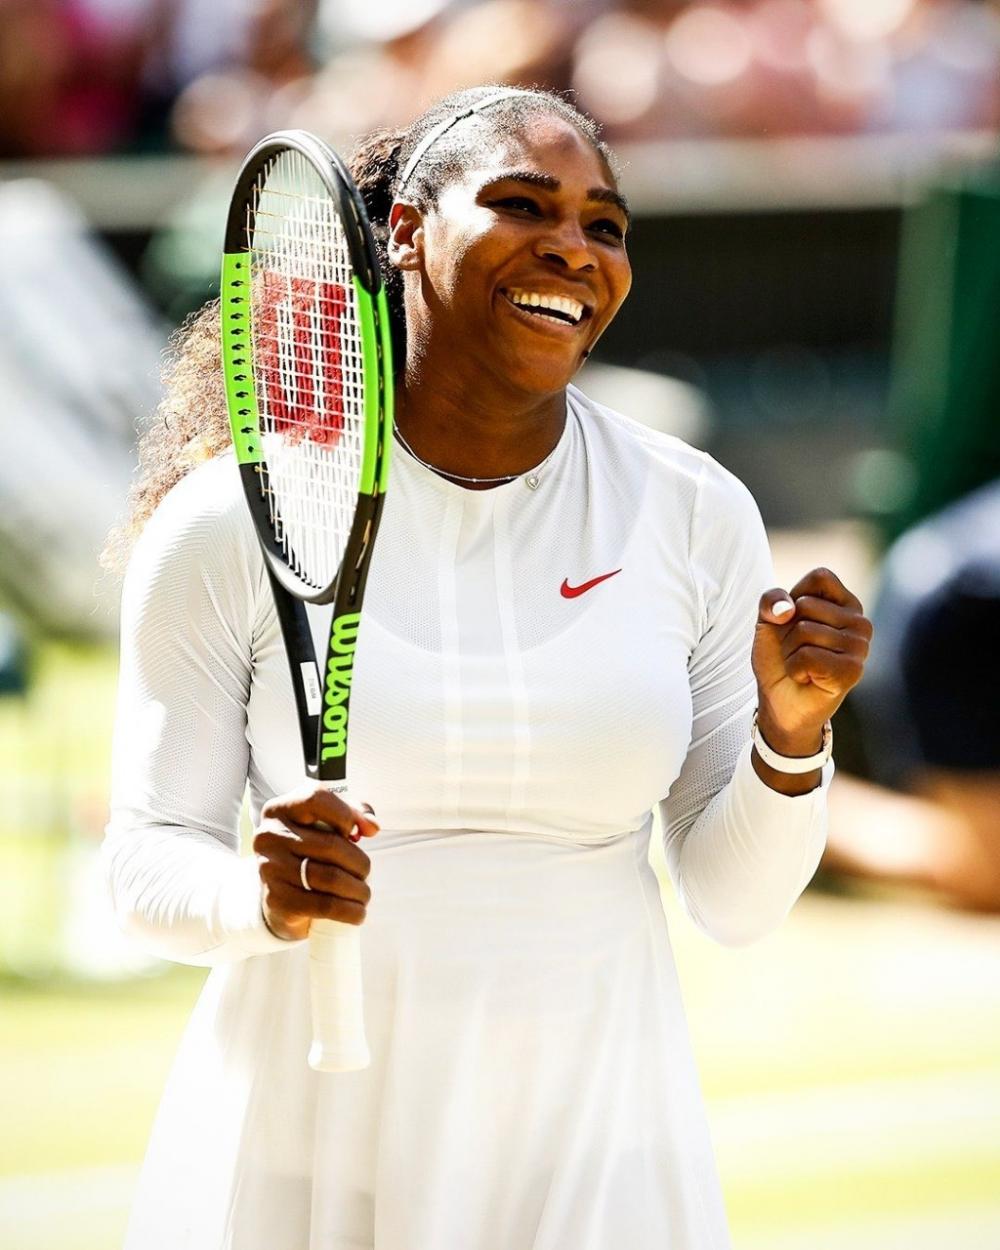 The Weekend Leader - 'Evolving away from tennis': Serena Williams hints at retirement after US Open